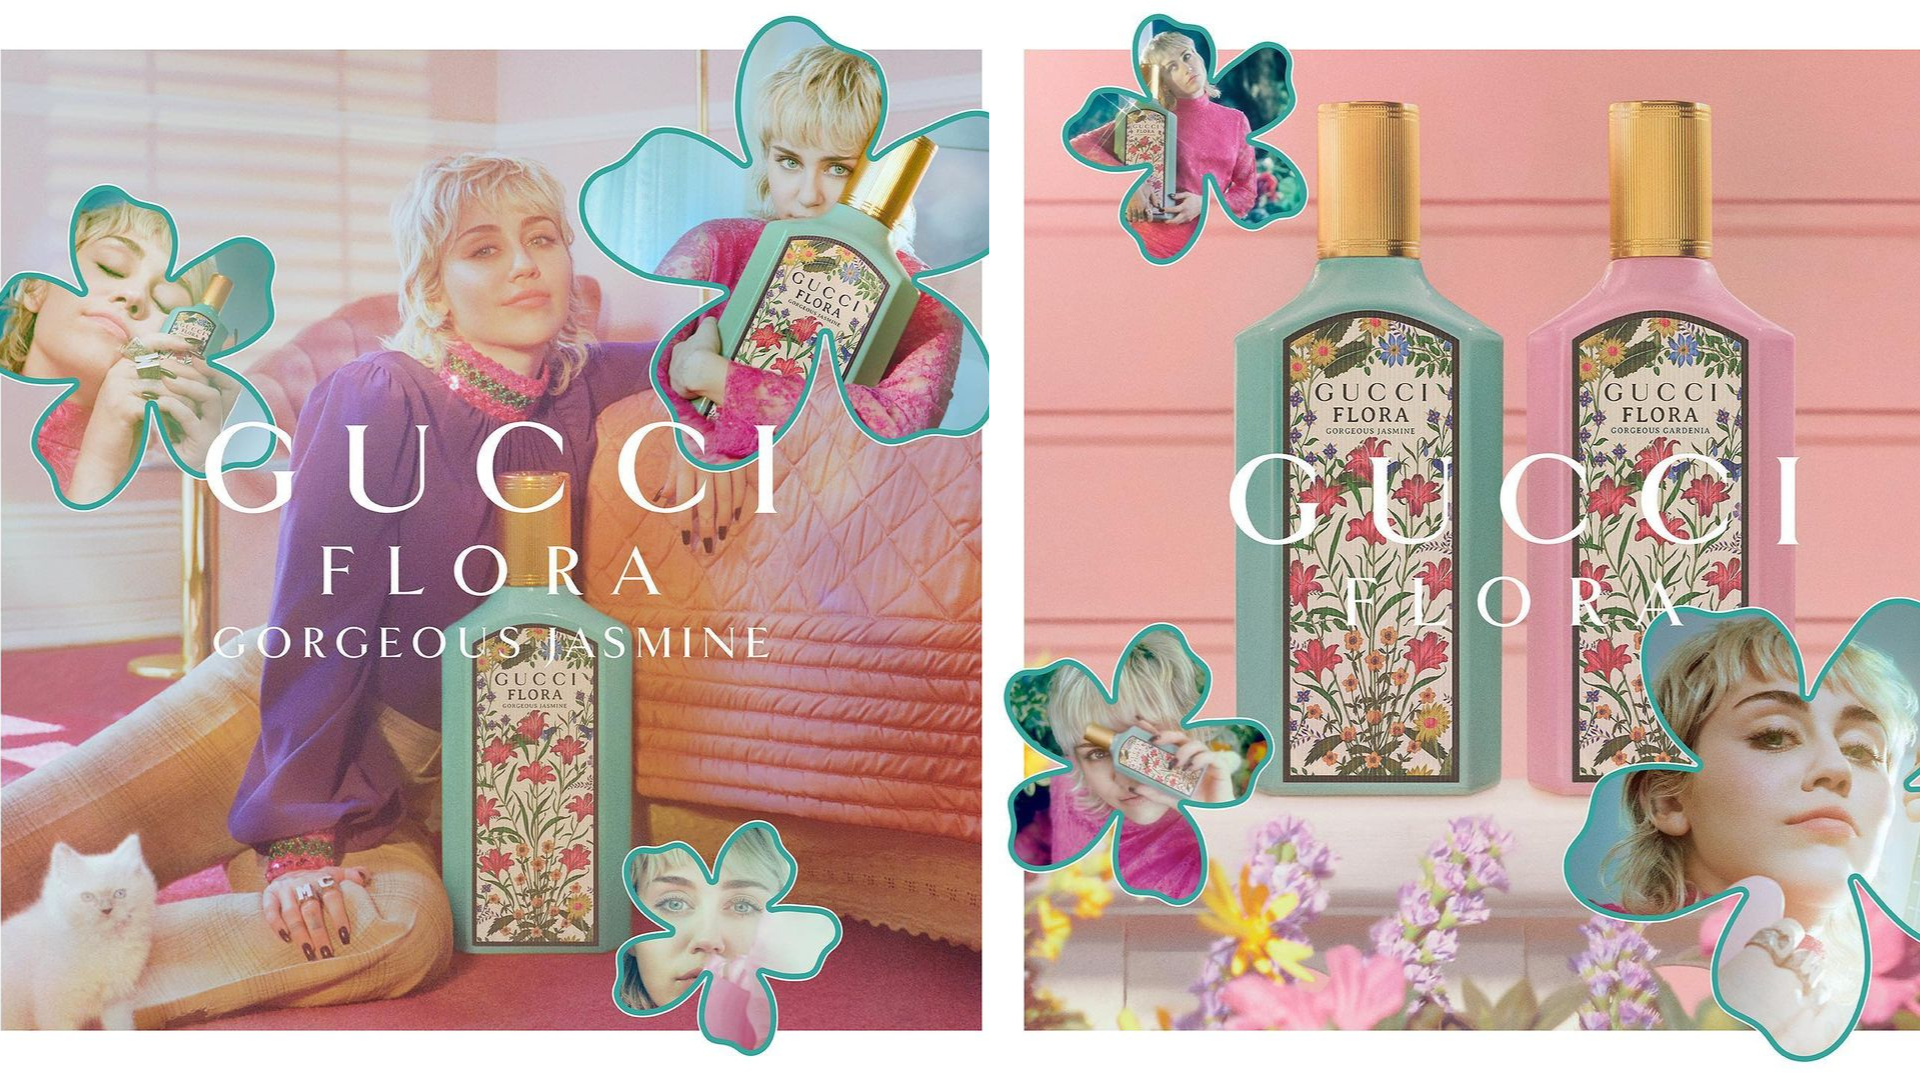 Miley Cyrus is the Face of Gucci's New Flora Gorgeous Jasmine Perfume - The  Tease